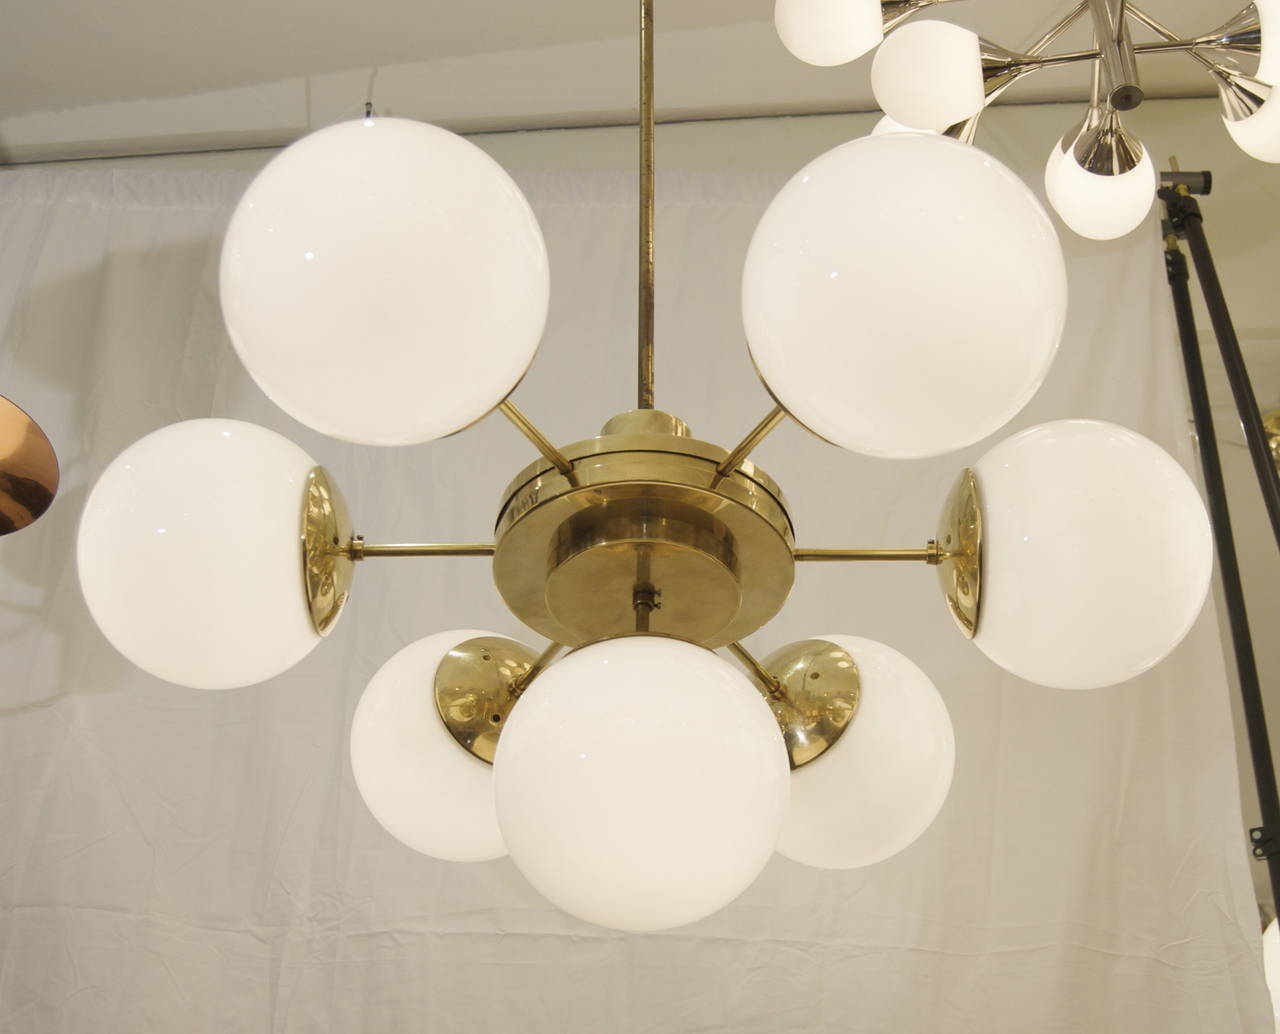 Early 20th Century Spectacular and Massive Bauhaus Era Chandeliers